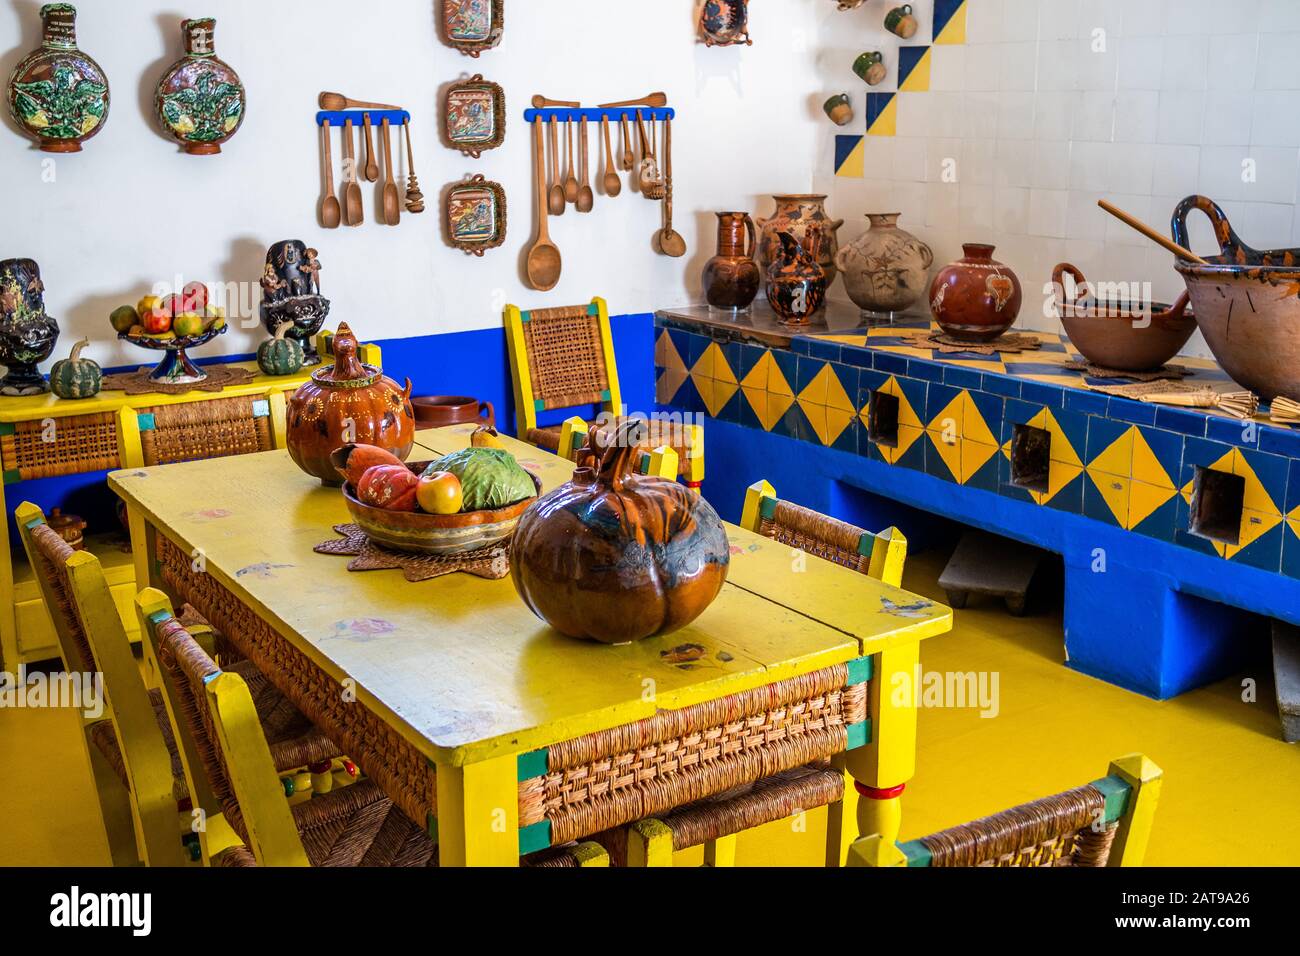 Kitchen in the Blue House aka Casa Azul, a historic house and art museum dedicated to the life and work of Mexican artist Frida Kahlo in Mexico City. Stock Photo